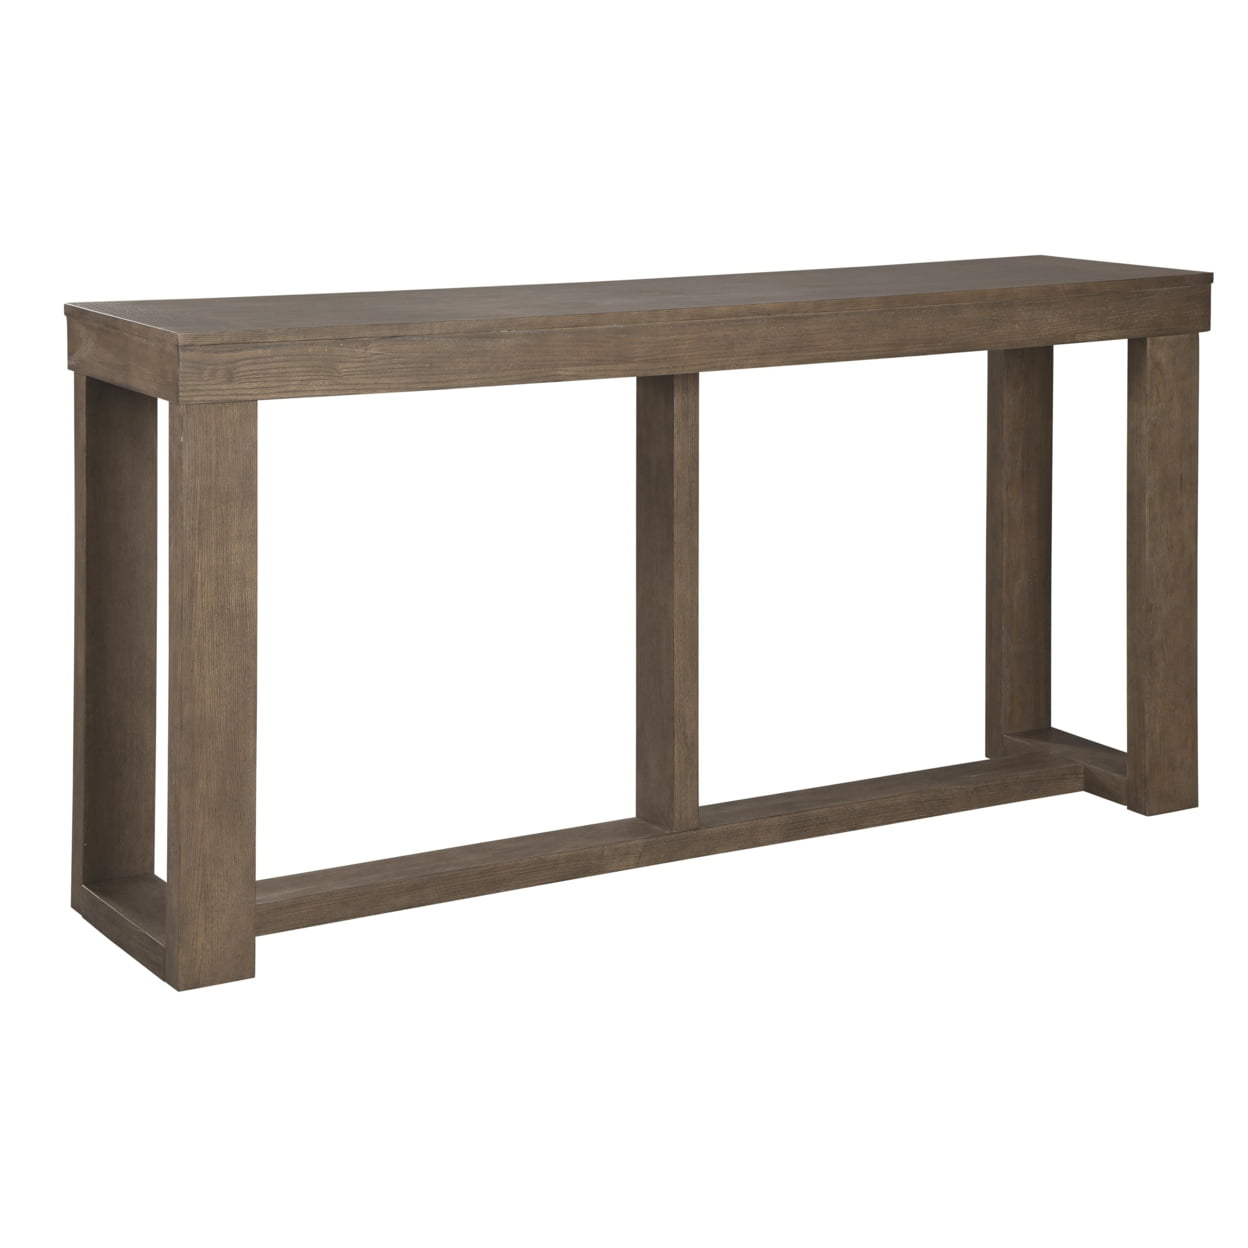 Picture of Benjara BM210853 Rectangular Wooden Sofa Table with Sled Base - Light Brown - 33.25 x 64.13 x 16.13 in.